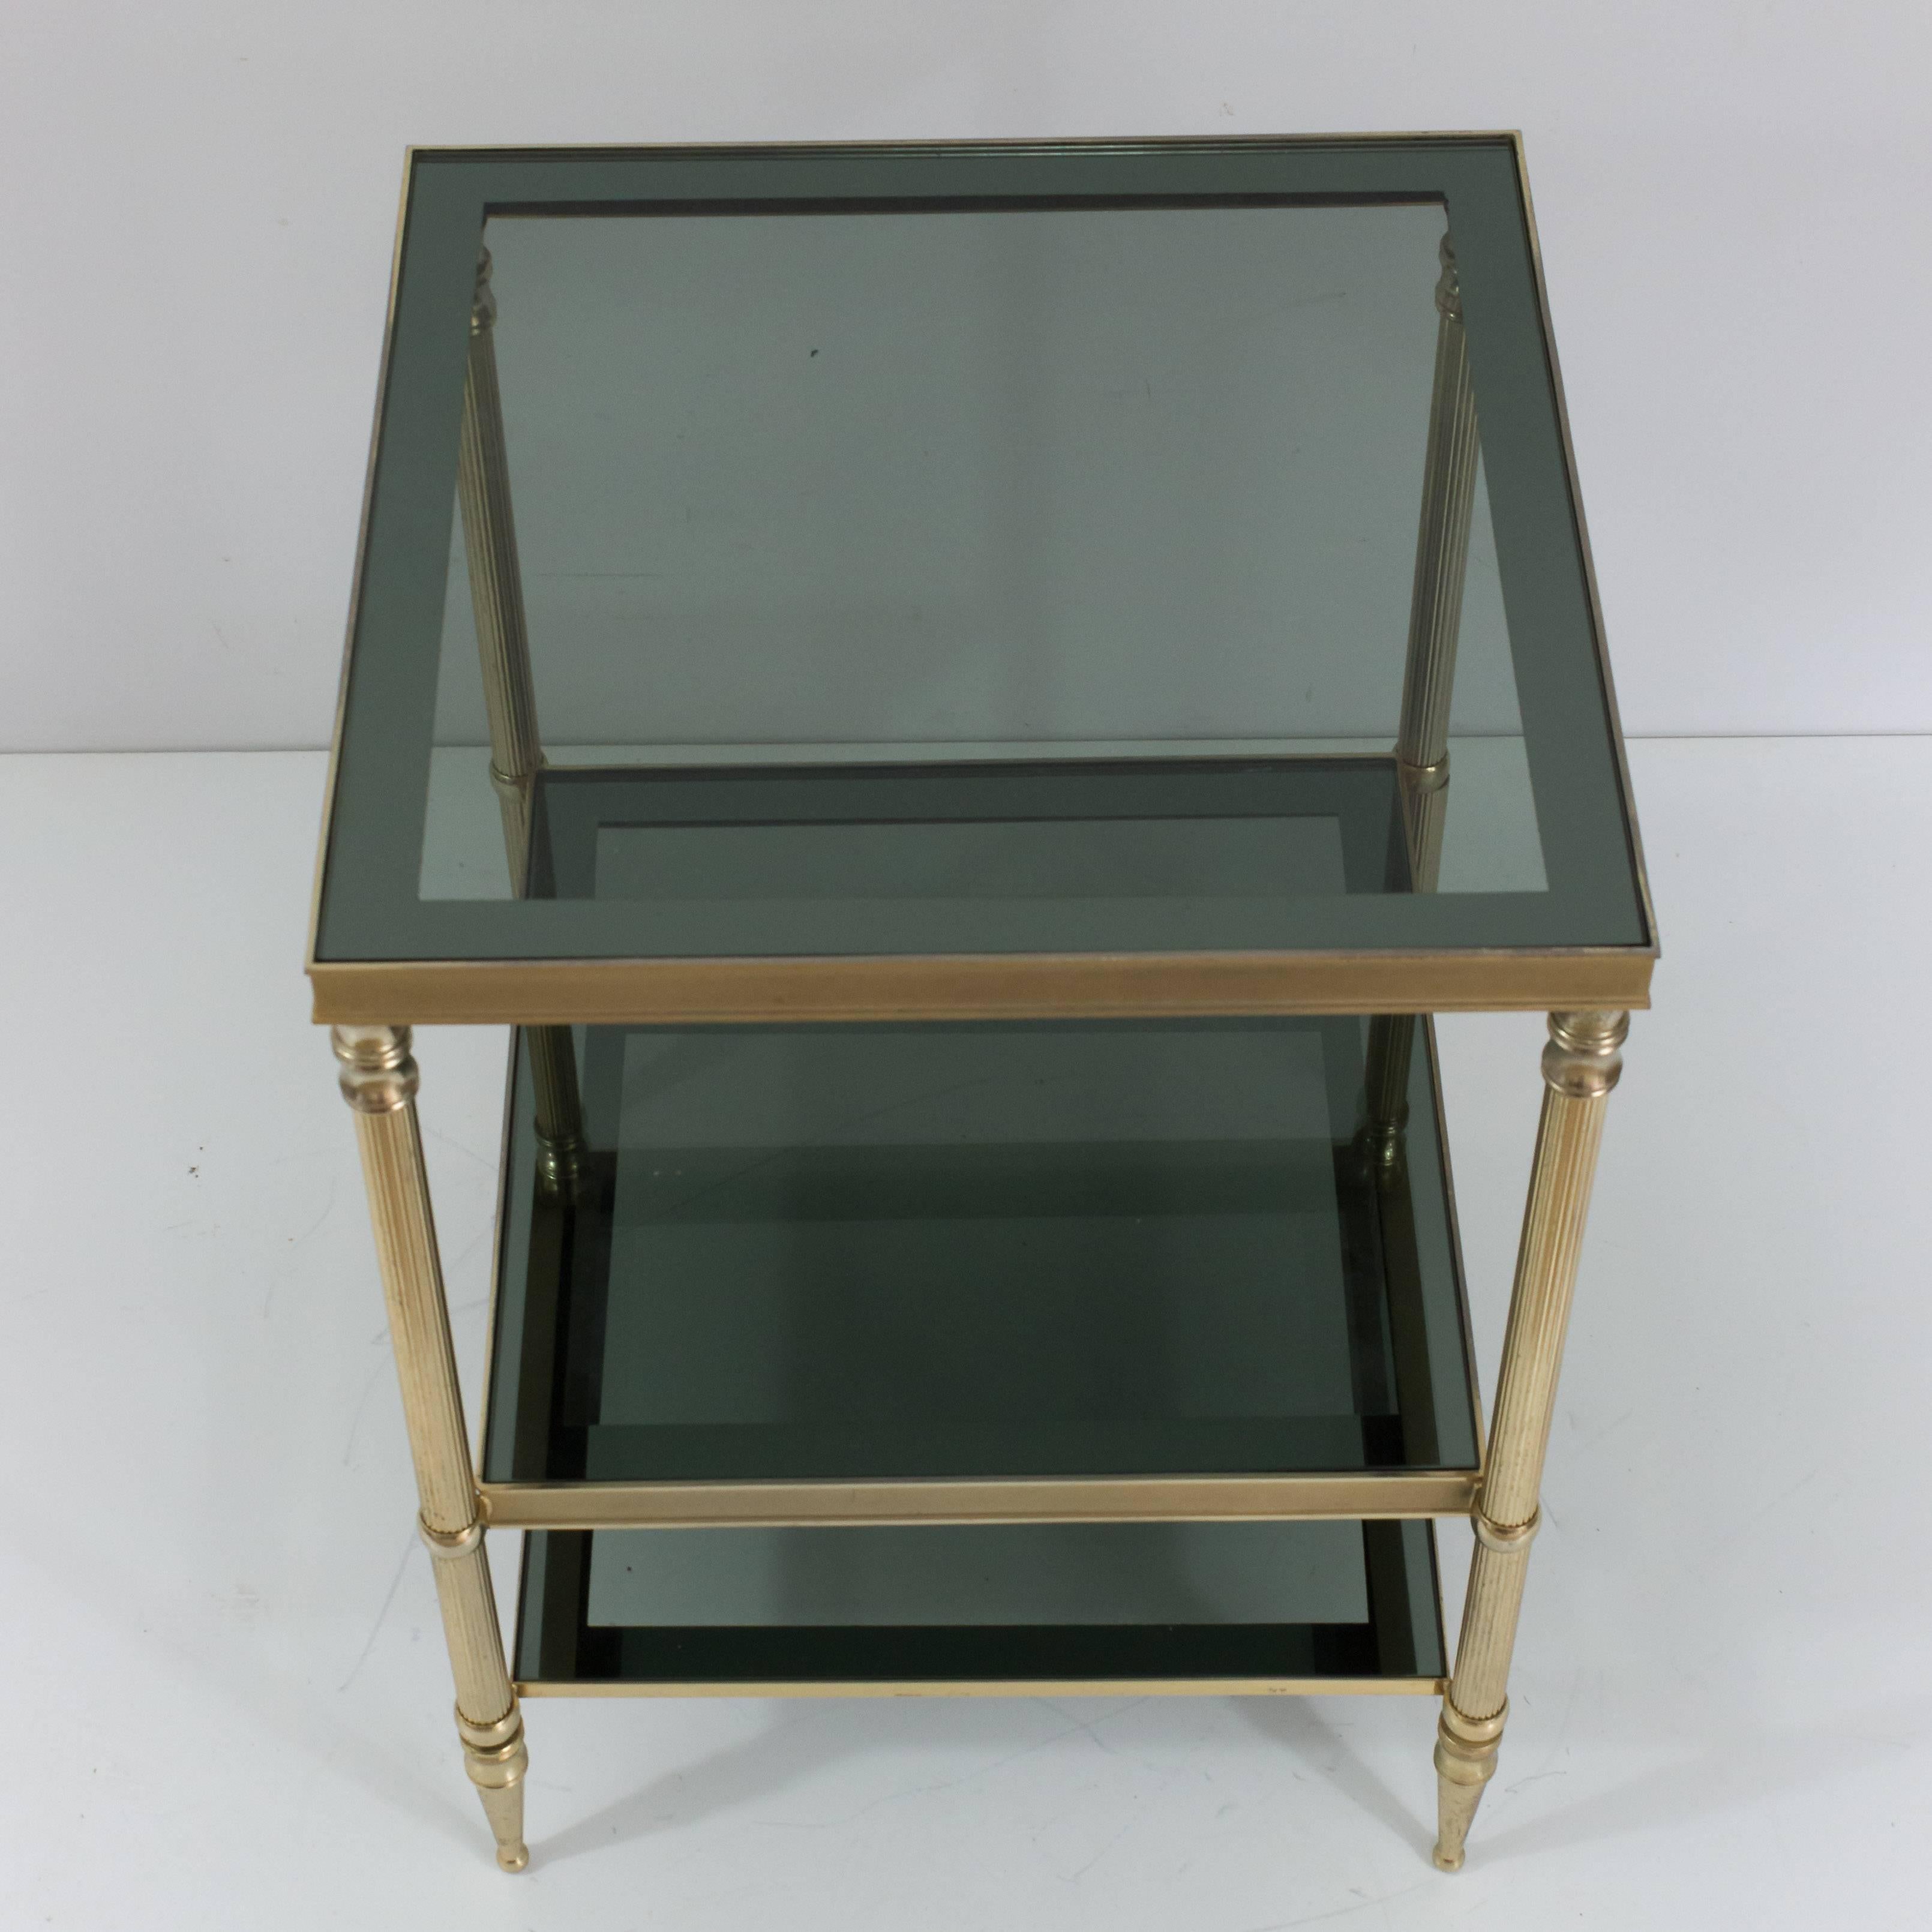 Neoclassical Pair of Brass Side Tables with Blue and Gray Glass Shelves